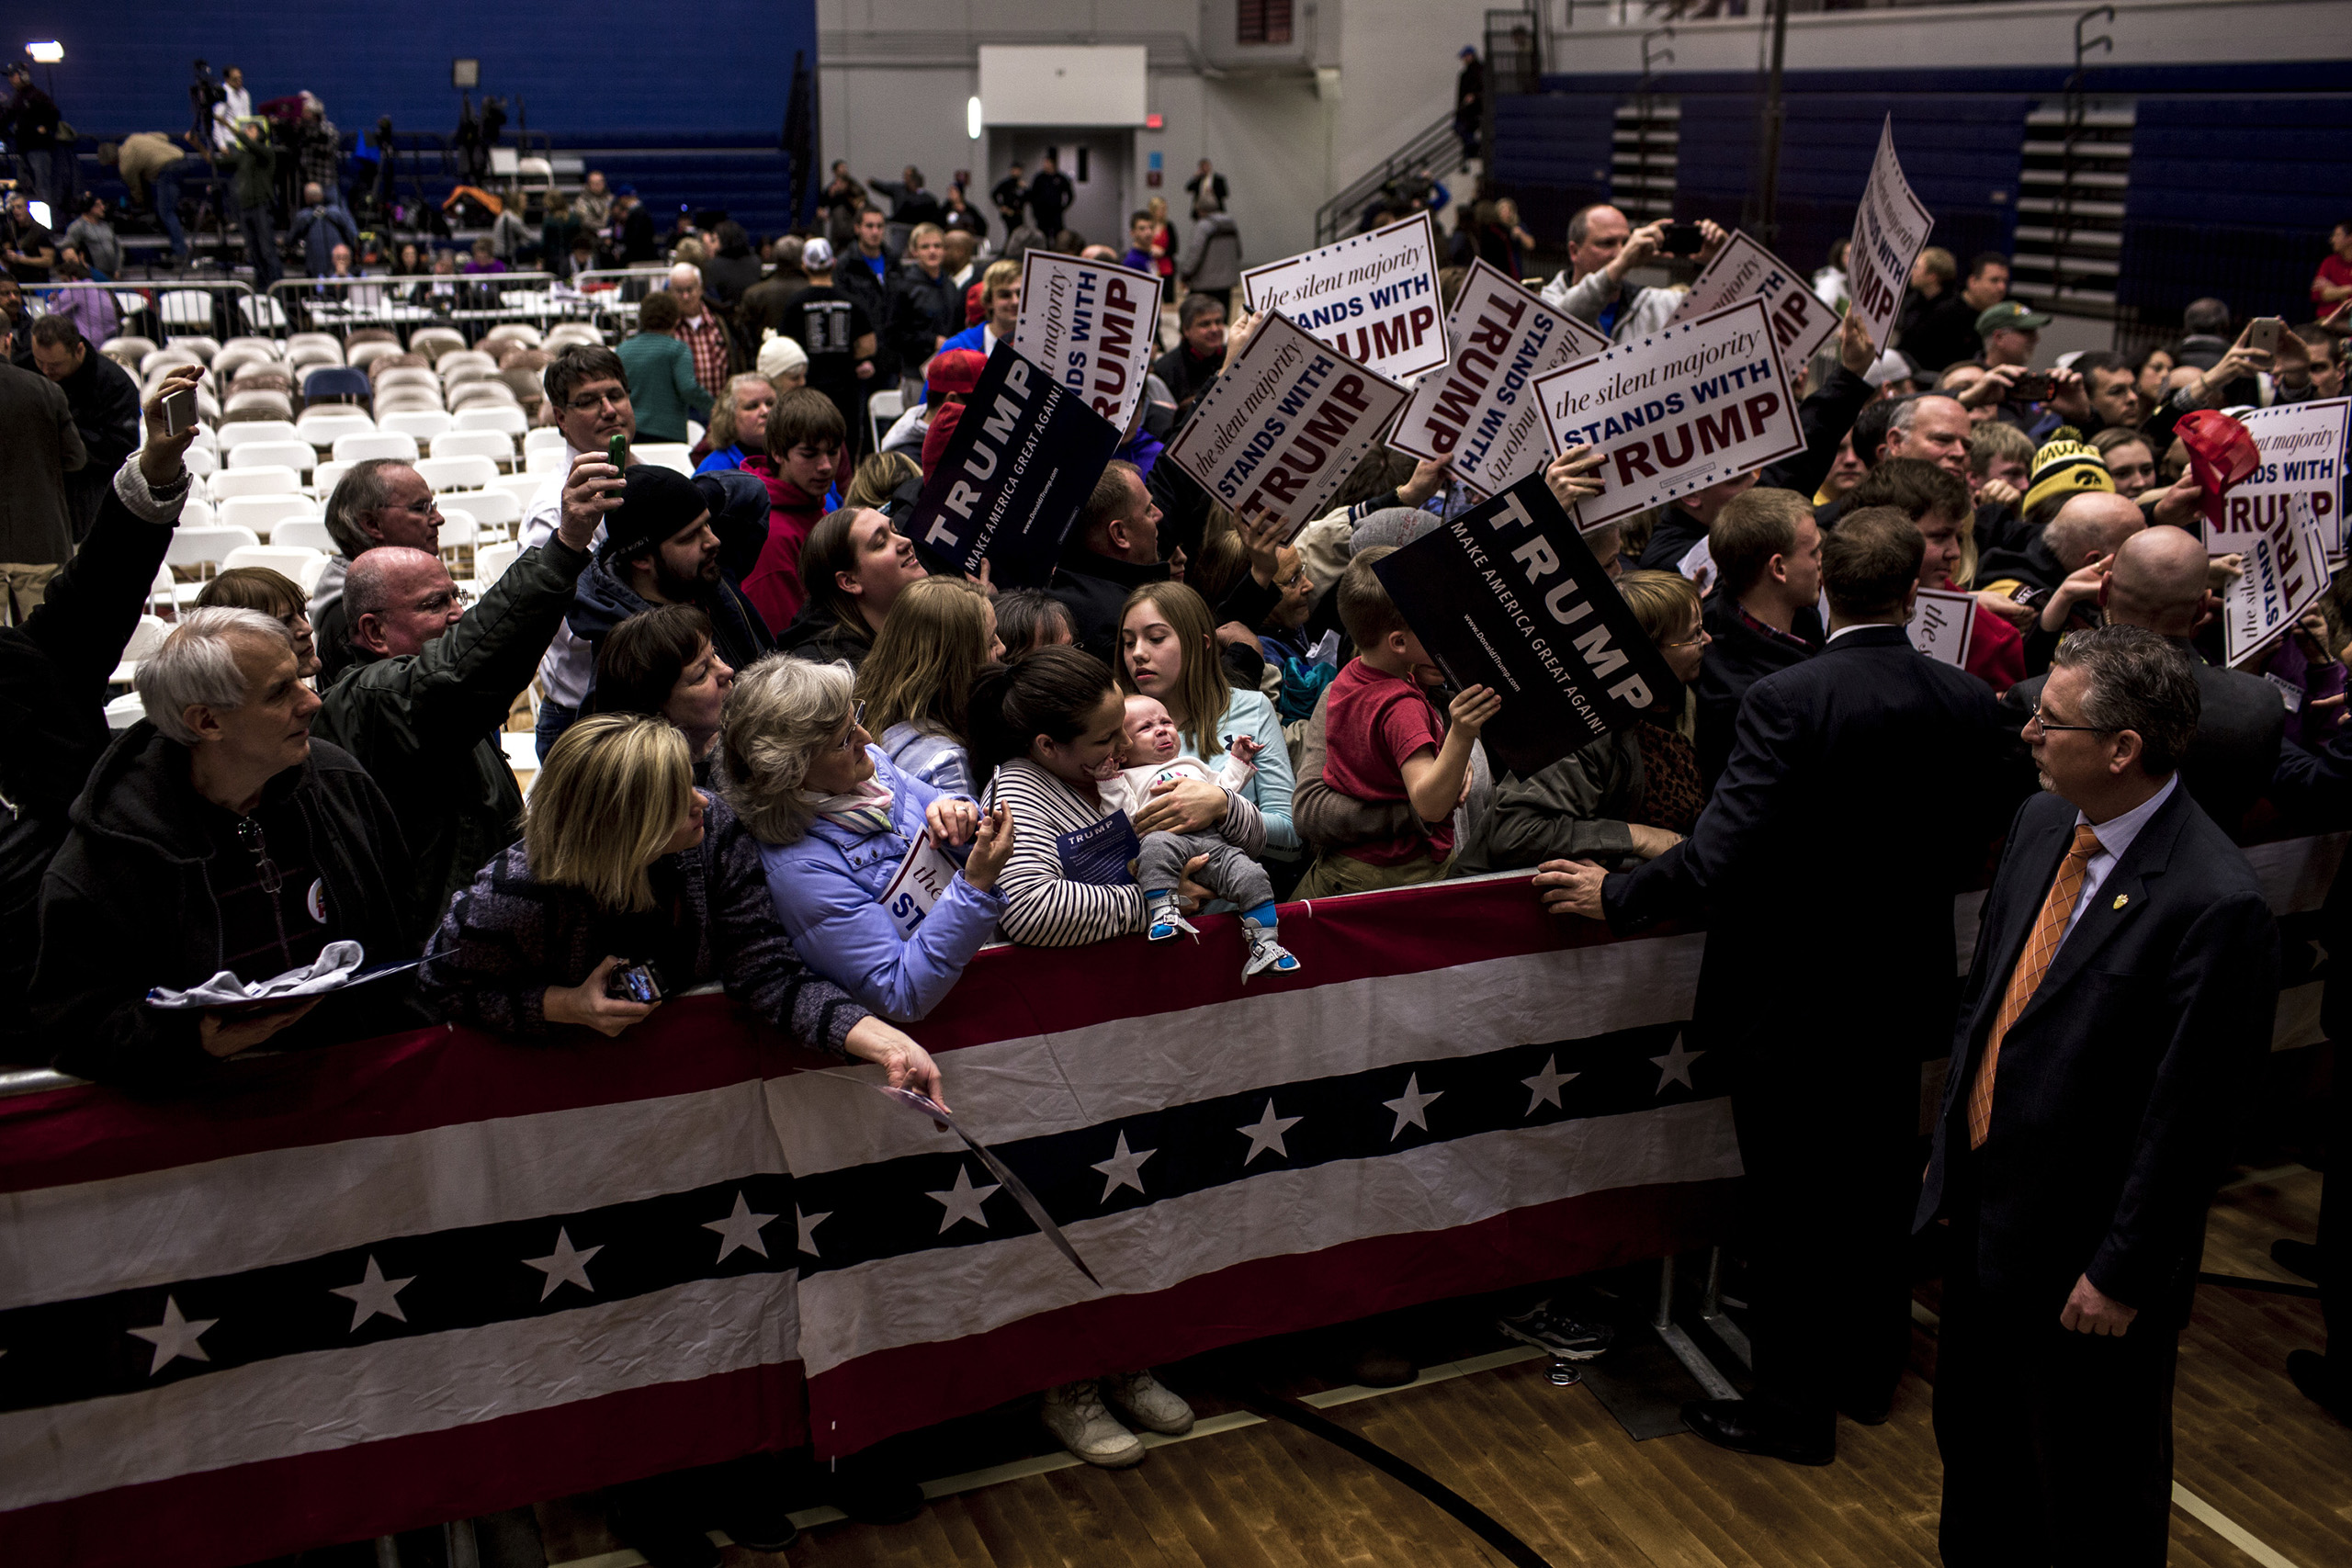 The crowd at a Donald Trump Rally at Marshalltown Community School District - Roundhouse Gymnasium on Jan. 26, 2016.